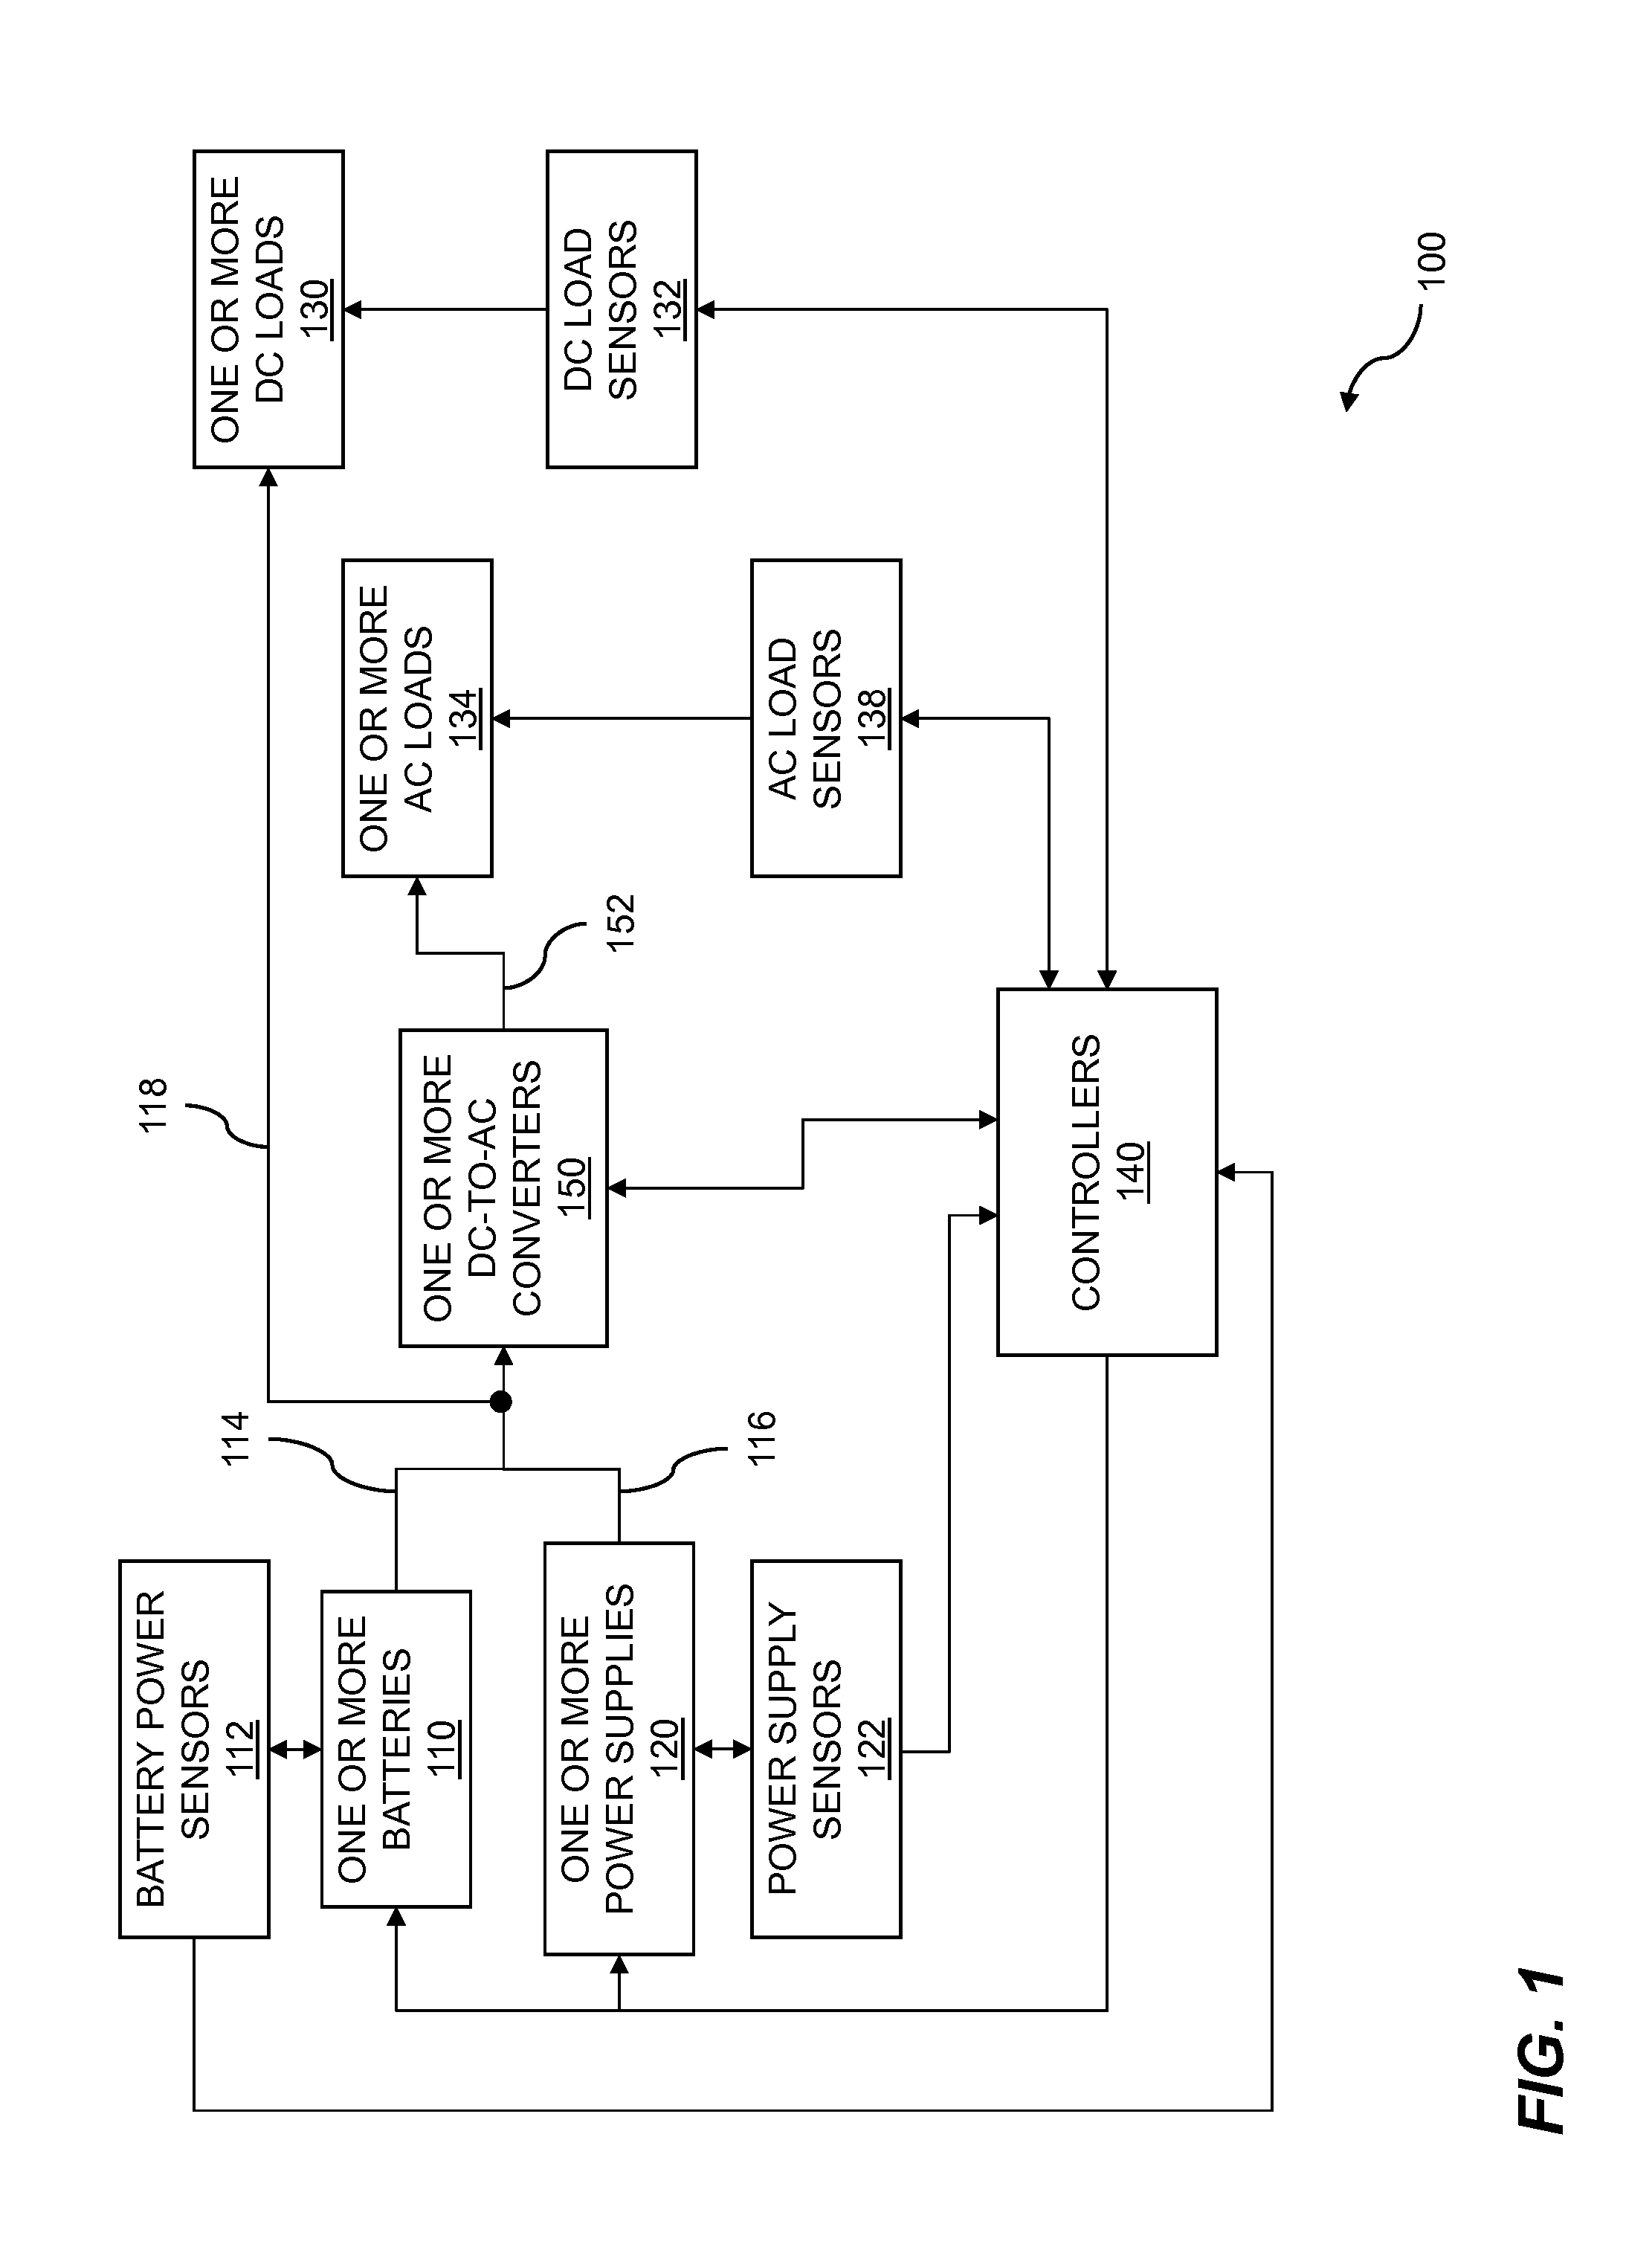 Multi-level data center consolidated power control